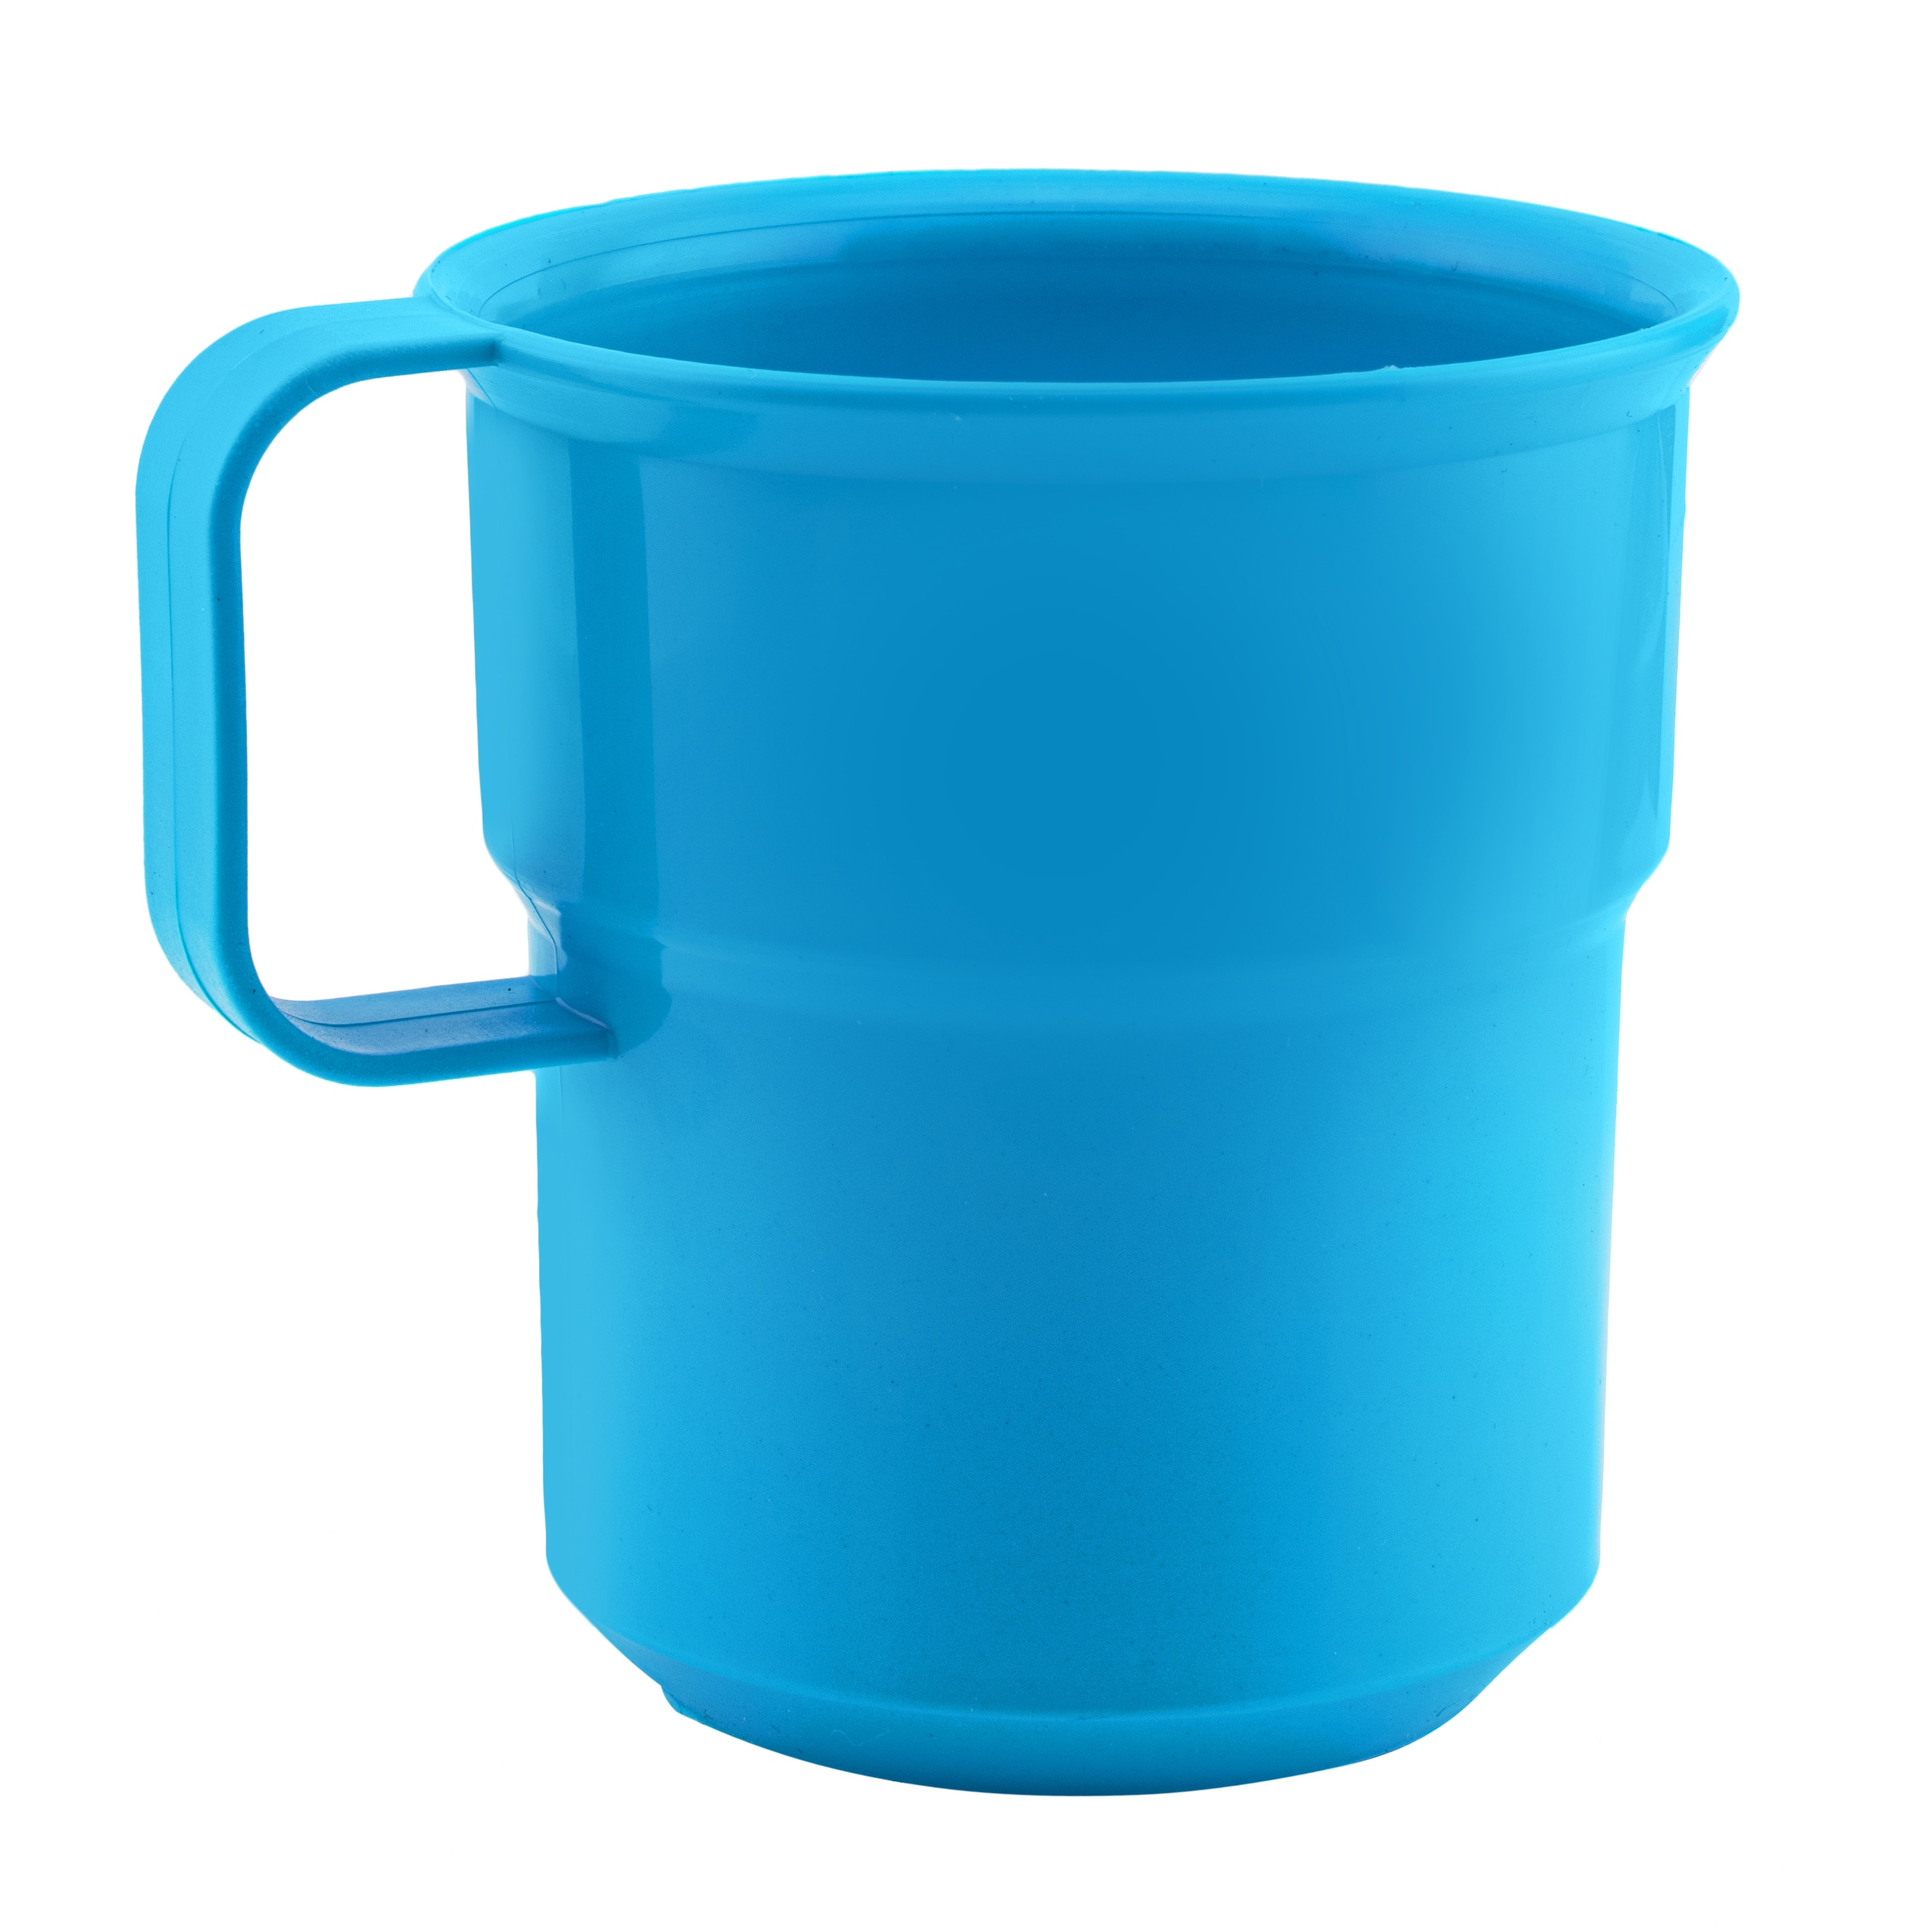 https://ak1.ostkcdn.com/images/products/is/images/direct/6841f3172e2e78115baab8587e6ce5d860663a69/Break-Resistant-Plastic-Cup-Mugs-for-Coffee%2C-Juice---8oz.jpg